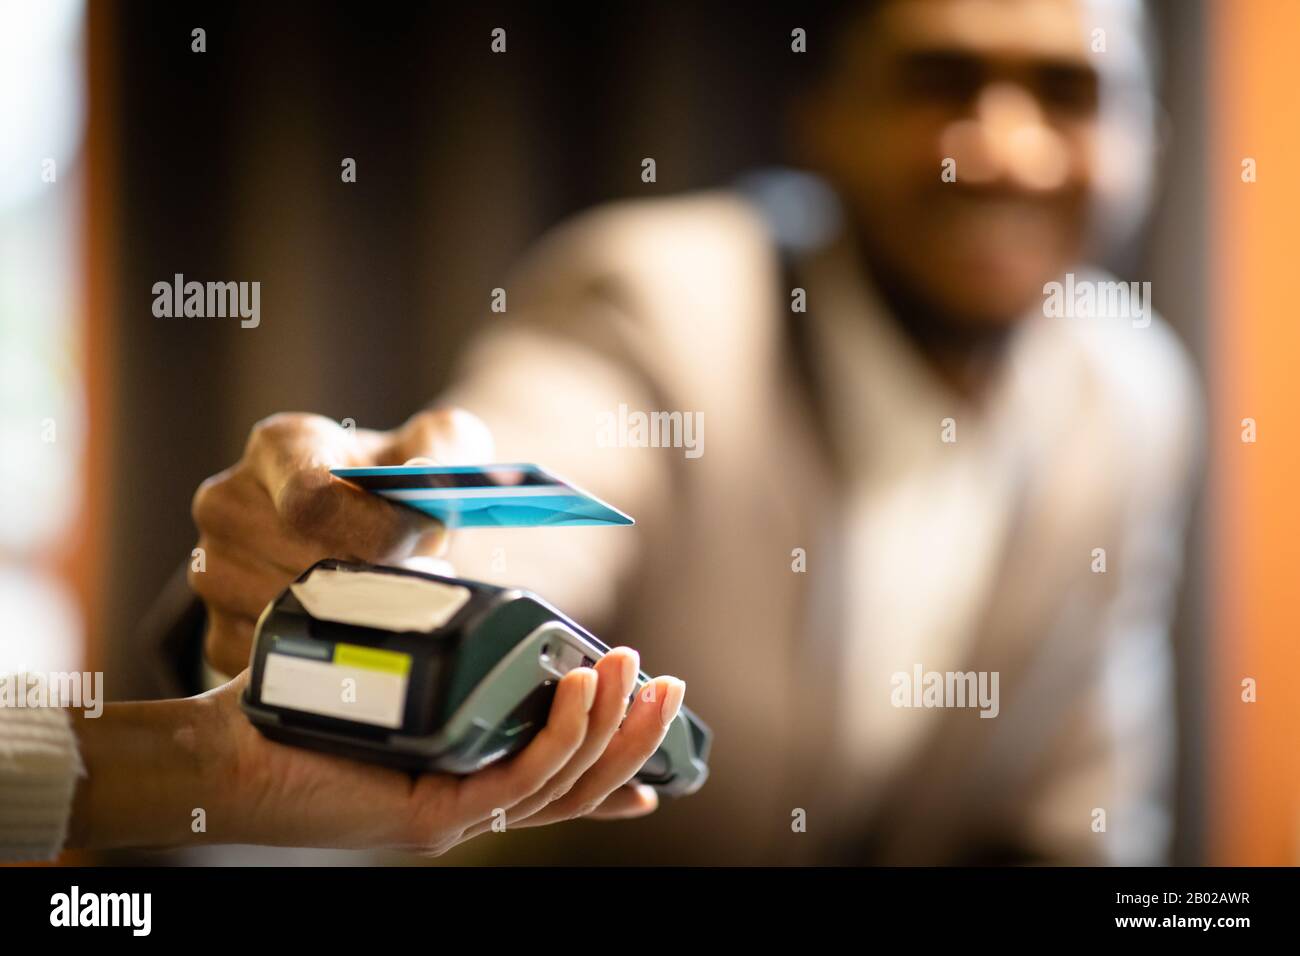 Afro businessman using modern contactless system at bar Stock Photo